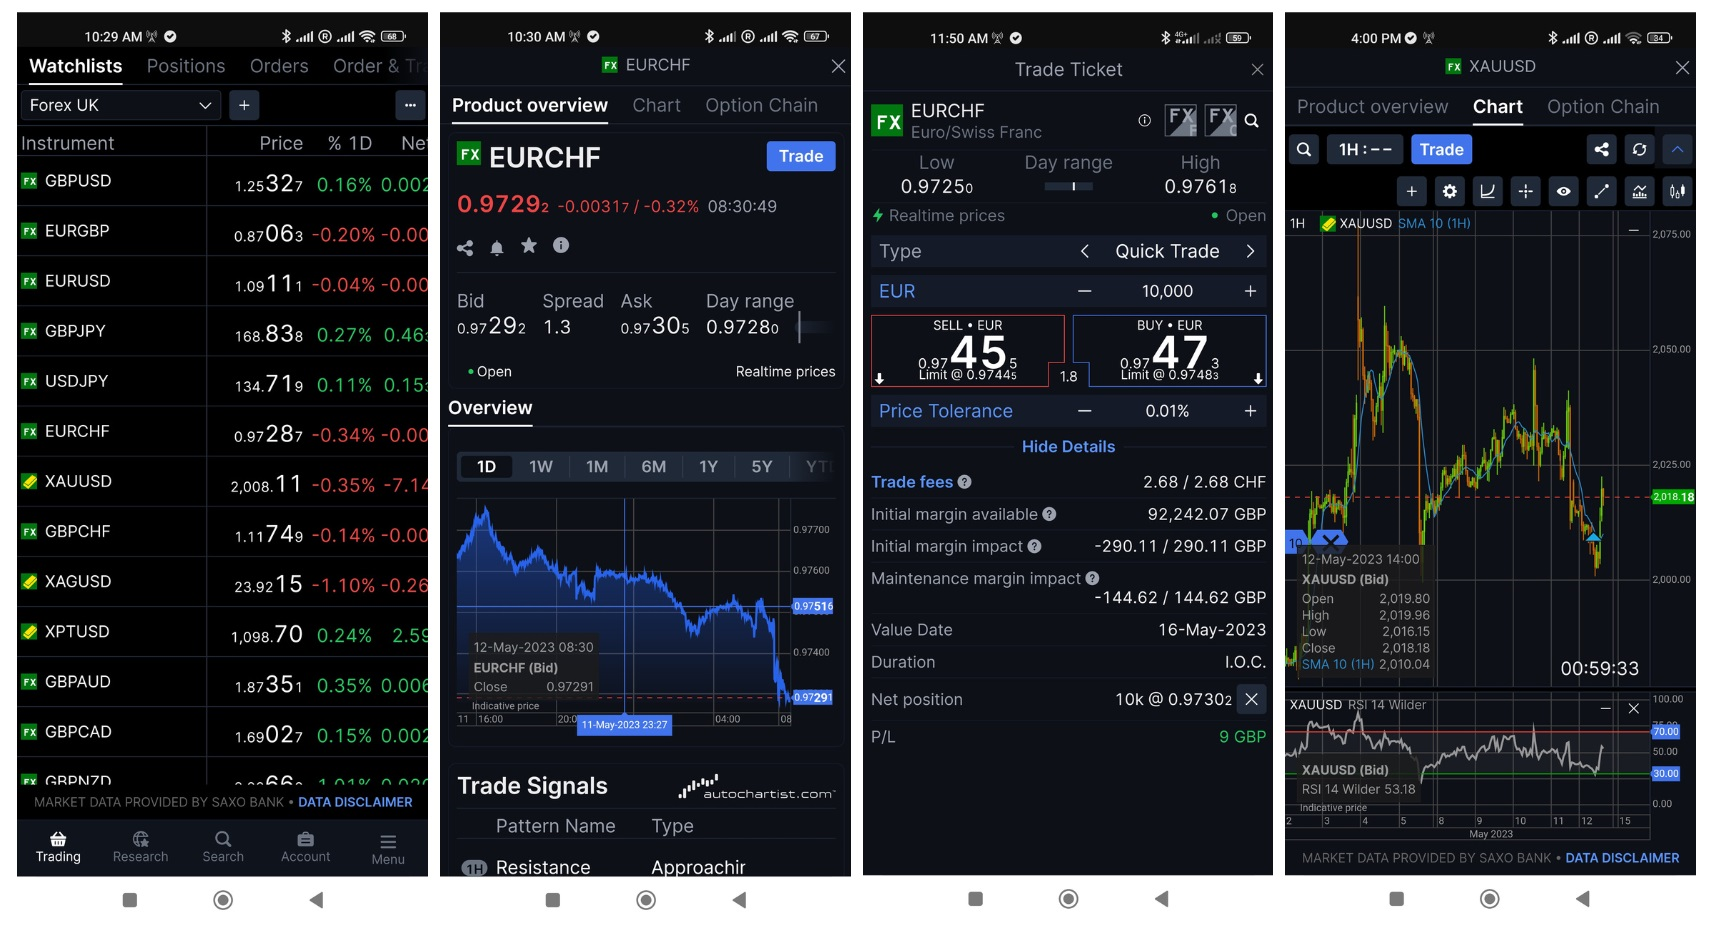 SaxoTraderGO Mobile App: Watchlist, Product Overview, Trade Ticket and Chart Panels